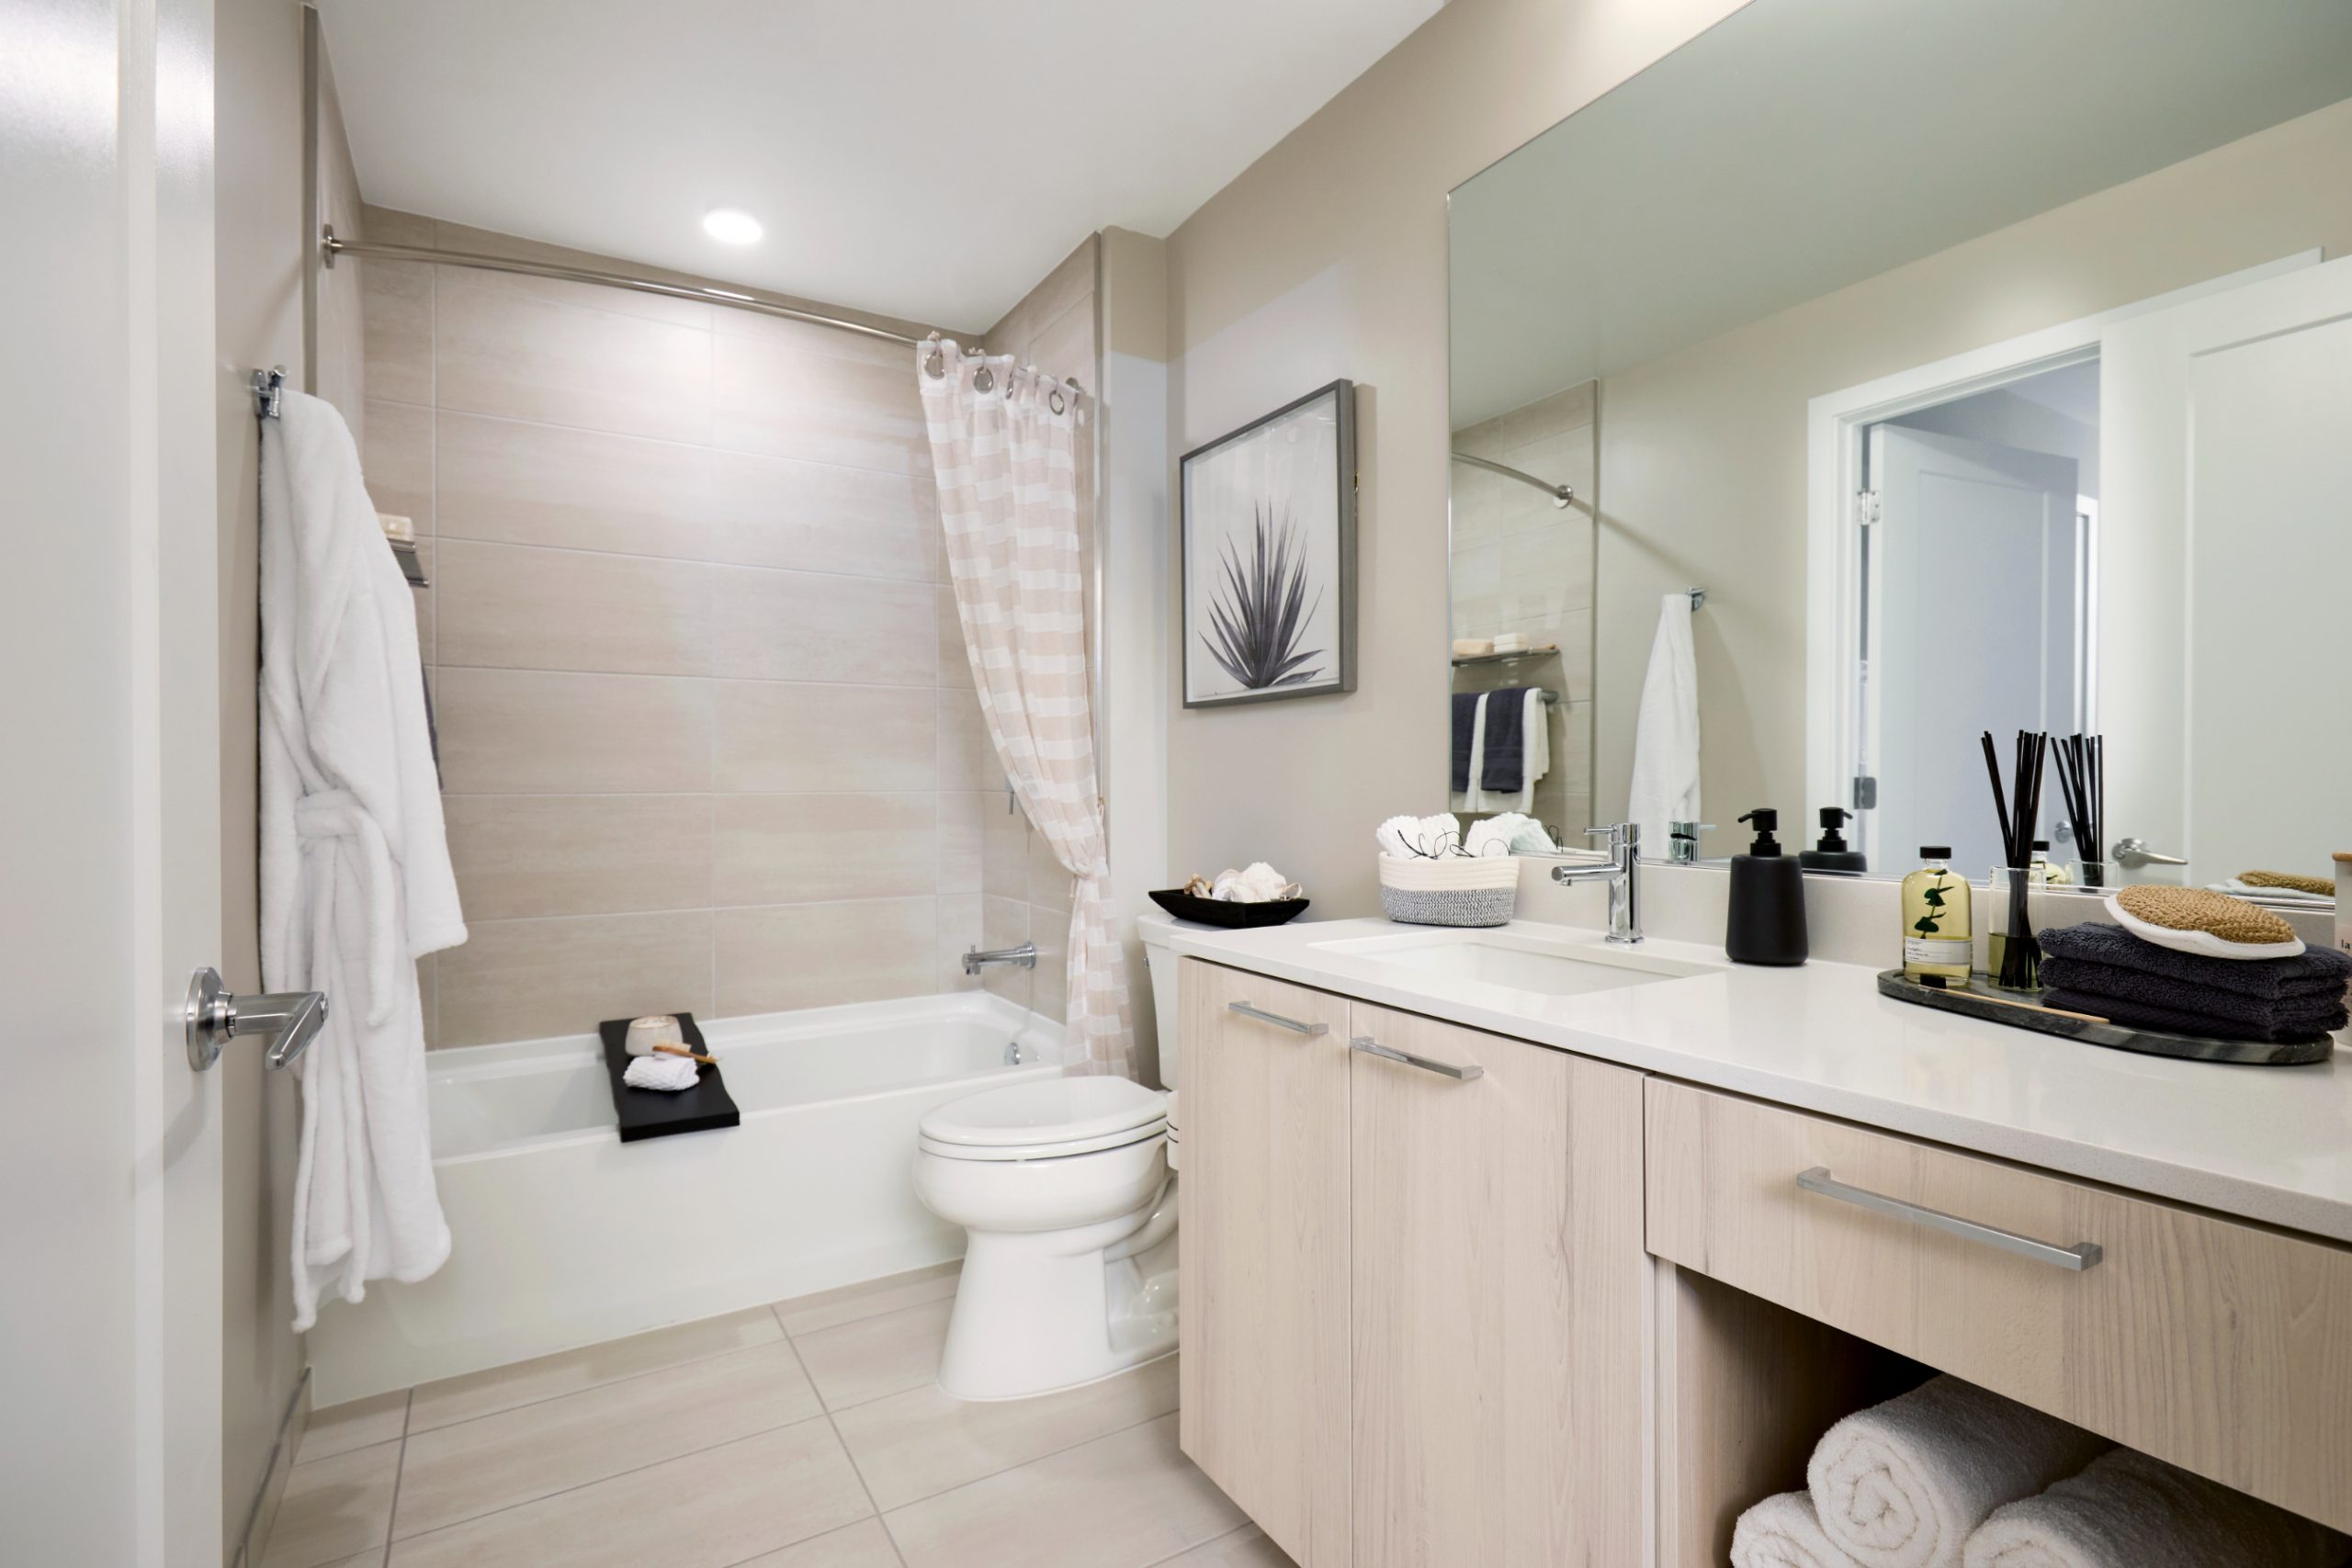 Bathrooms feature refined details, such as chrome fixtures and light cabinetry